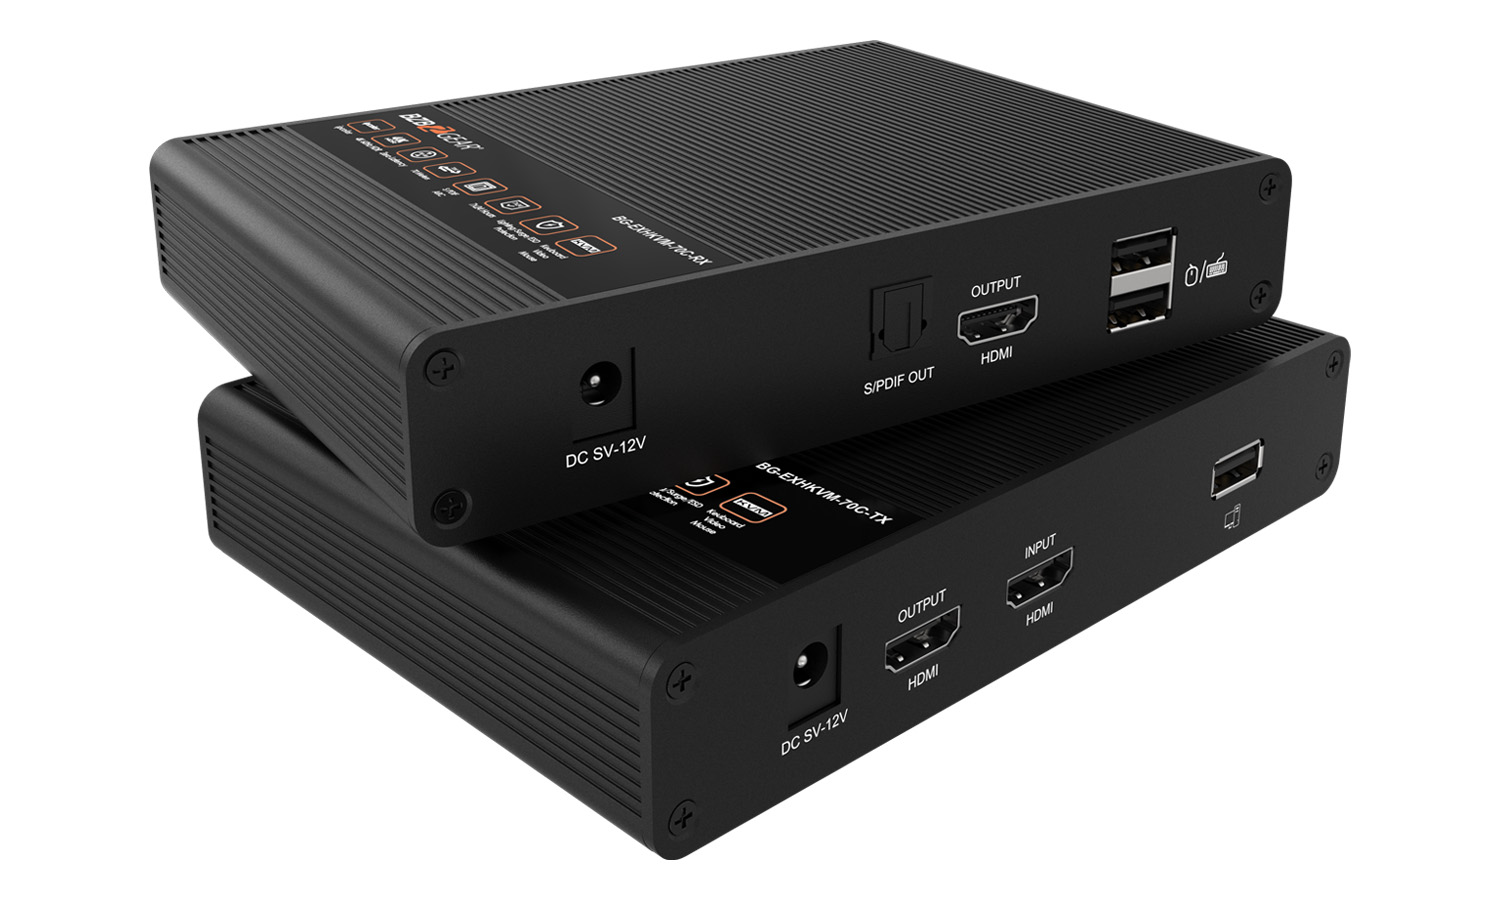 BG-EXHKVM-70C 4K UHD HDMI and KVM Extender with Zero Latency up to 230ft Support HDR and ARC by BZBGEAR